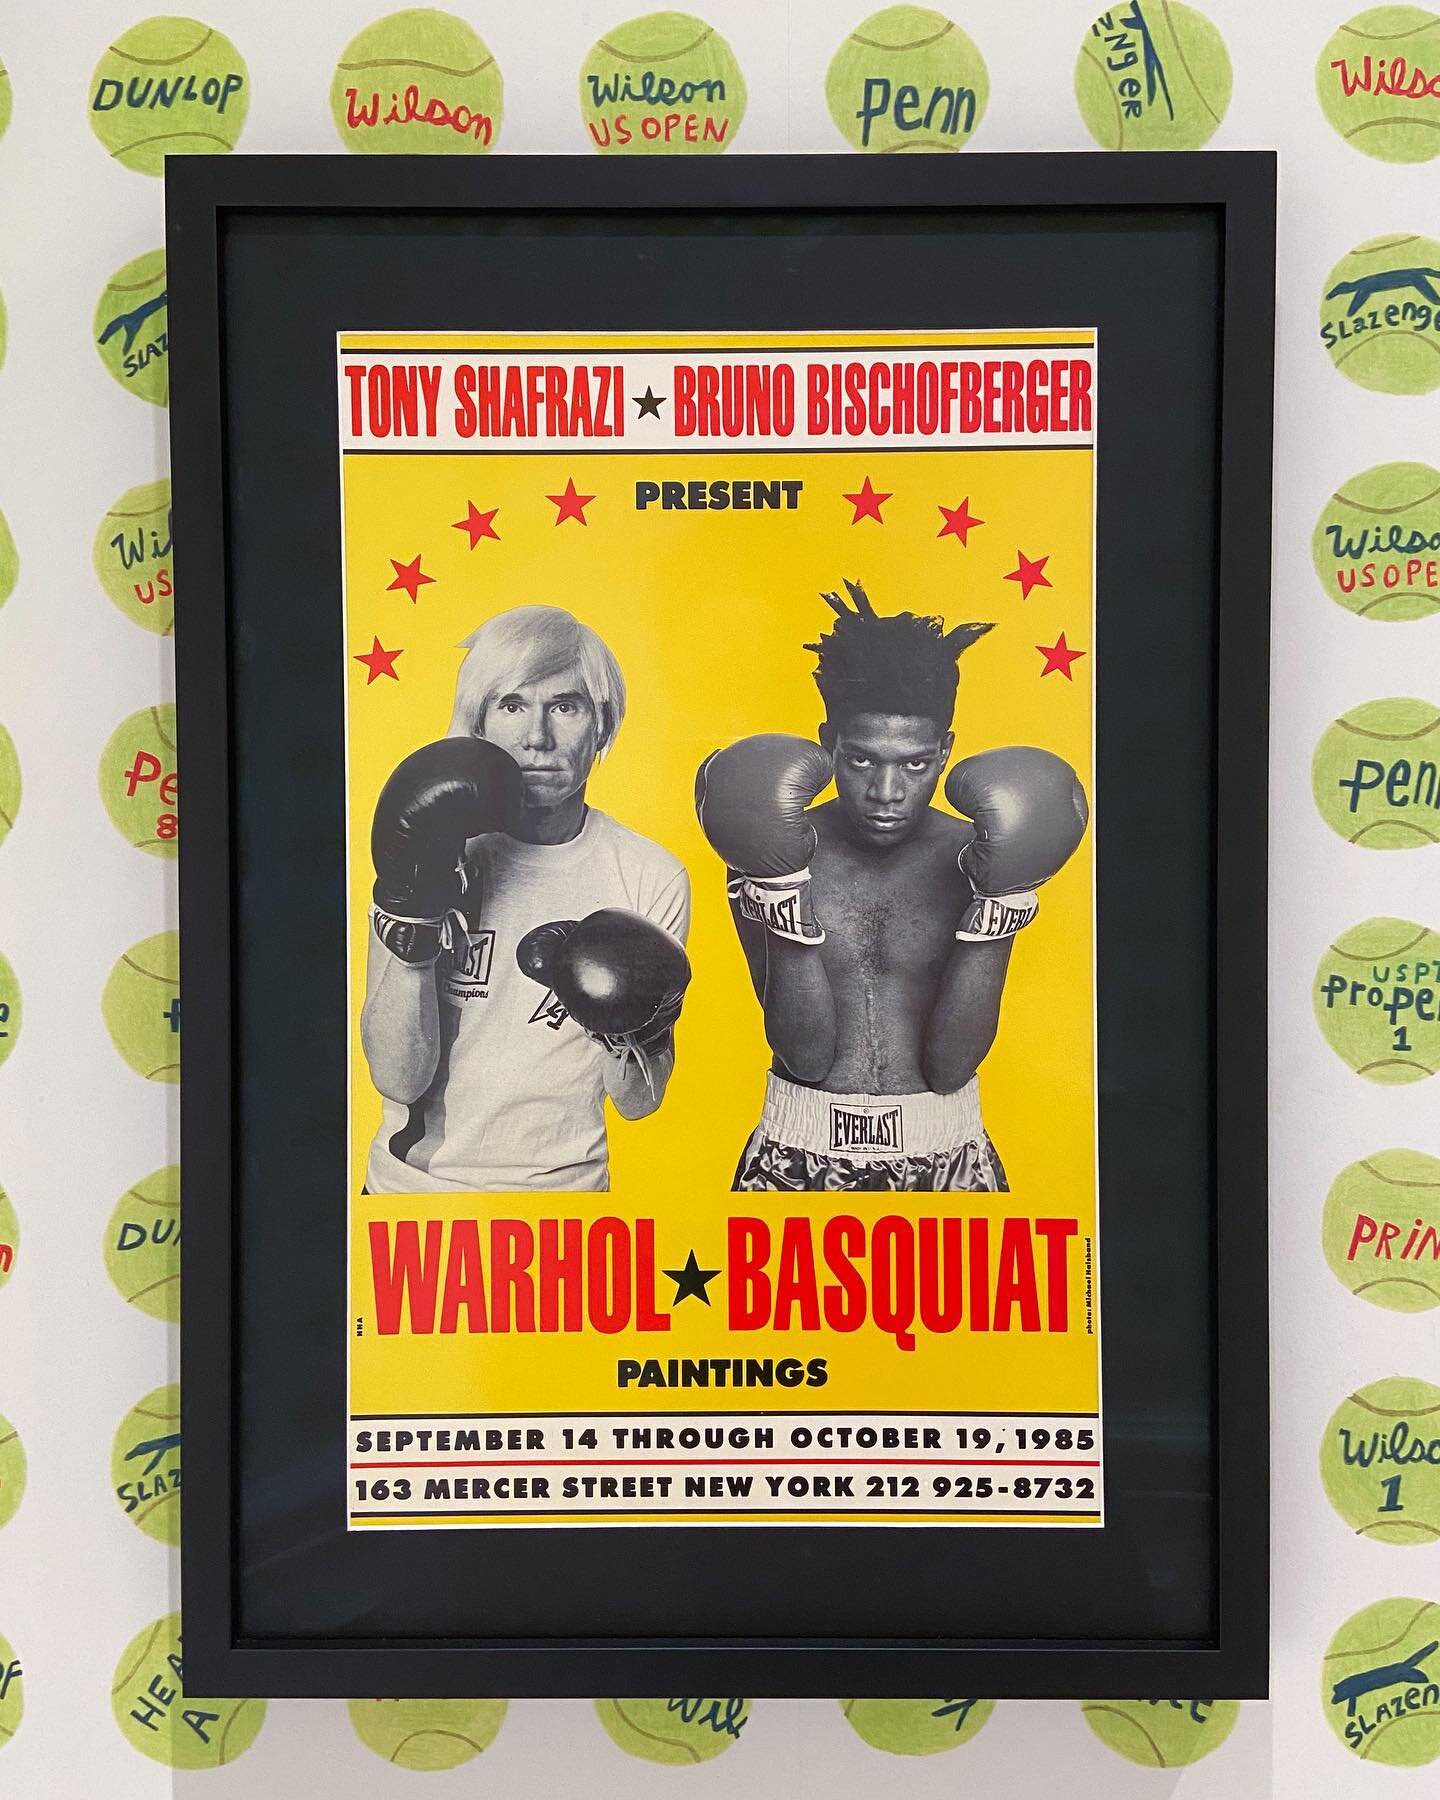 Spent some time with a sweet and knowledgeable collector yesterday. One of the works in his home was an original poster from the 1985 Warhol and Basquiat show that I based my Marilyn Manson and Rob Zombie tour poster on. I hadn&rsquo;t seen one of th